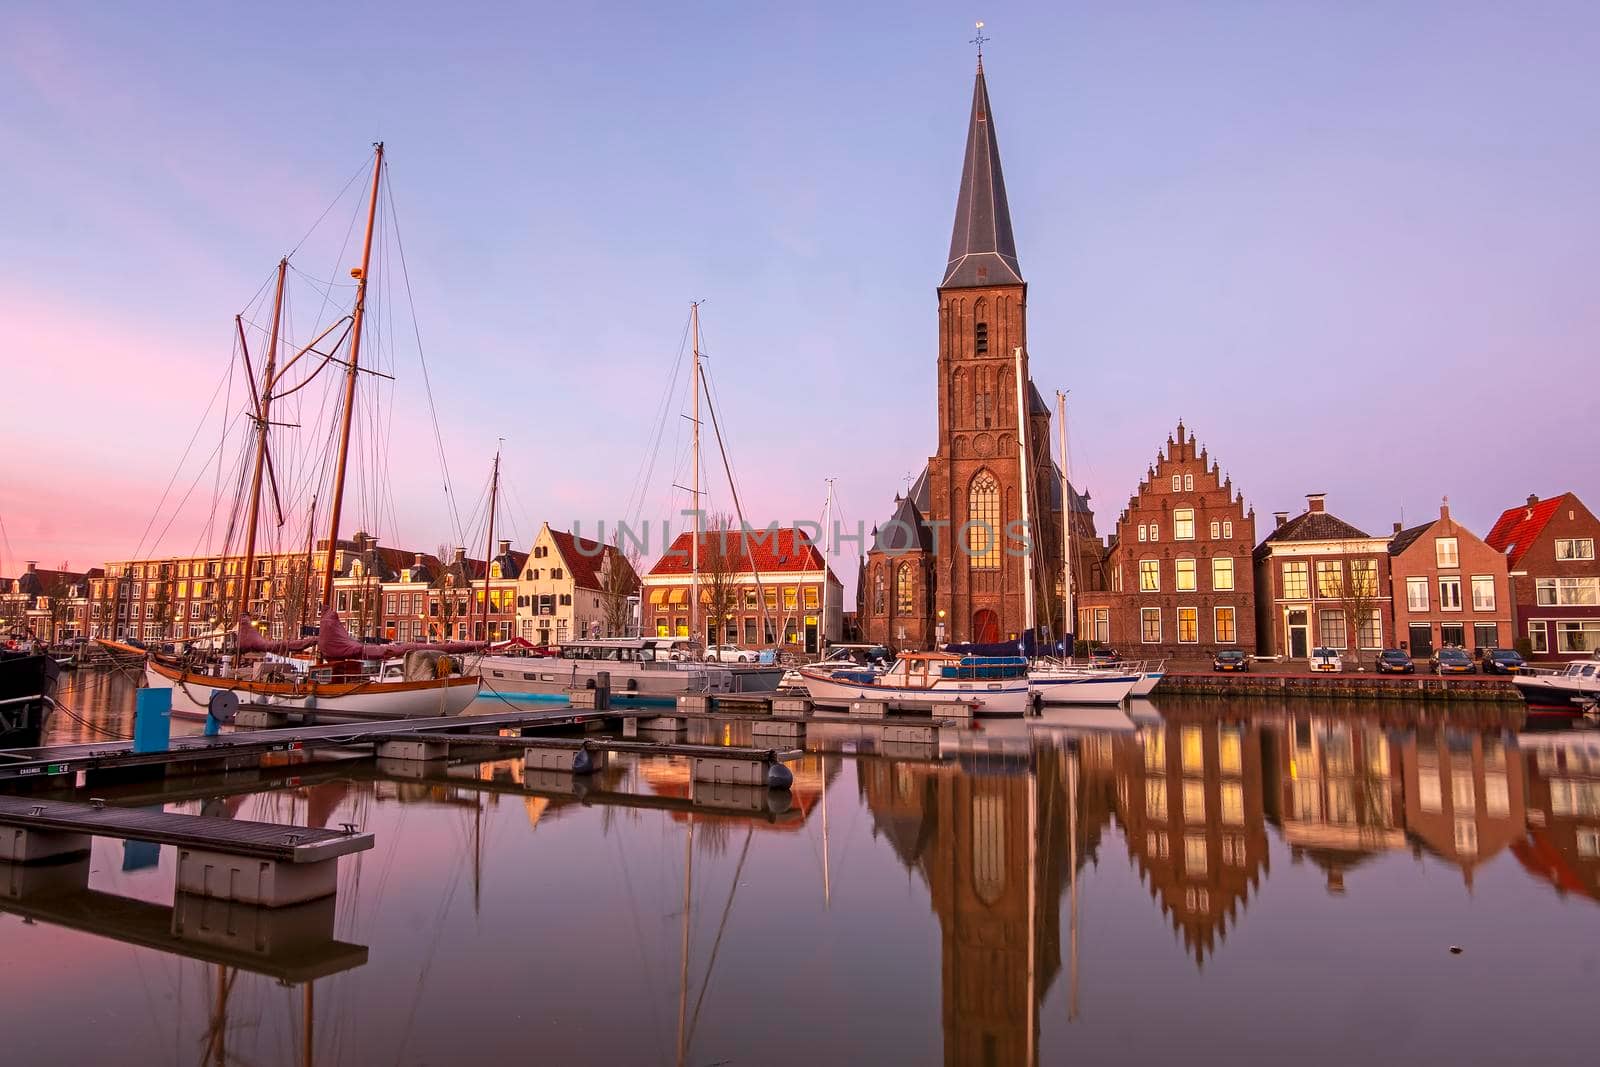 View on St. Michaels church in the city Harlingen in Friesland the Netherlands at sunset by devy